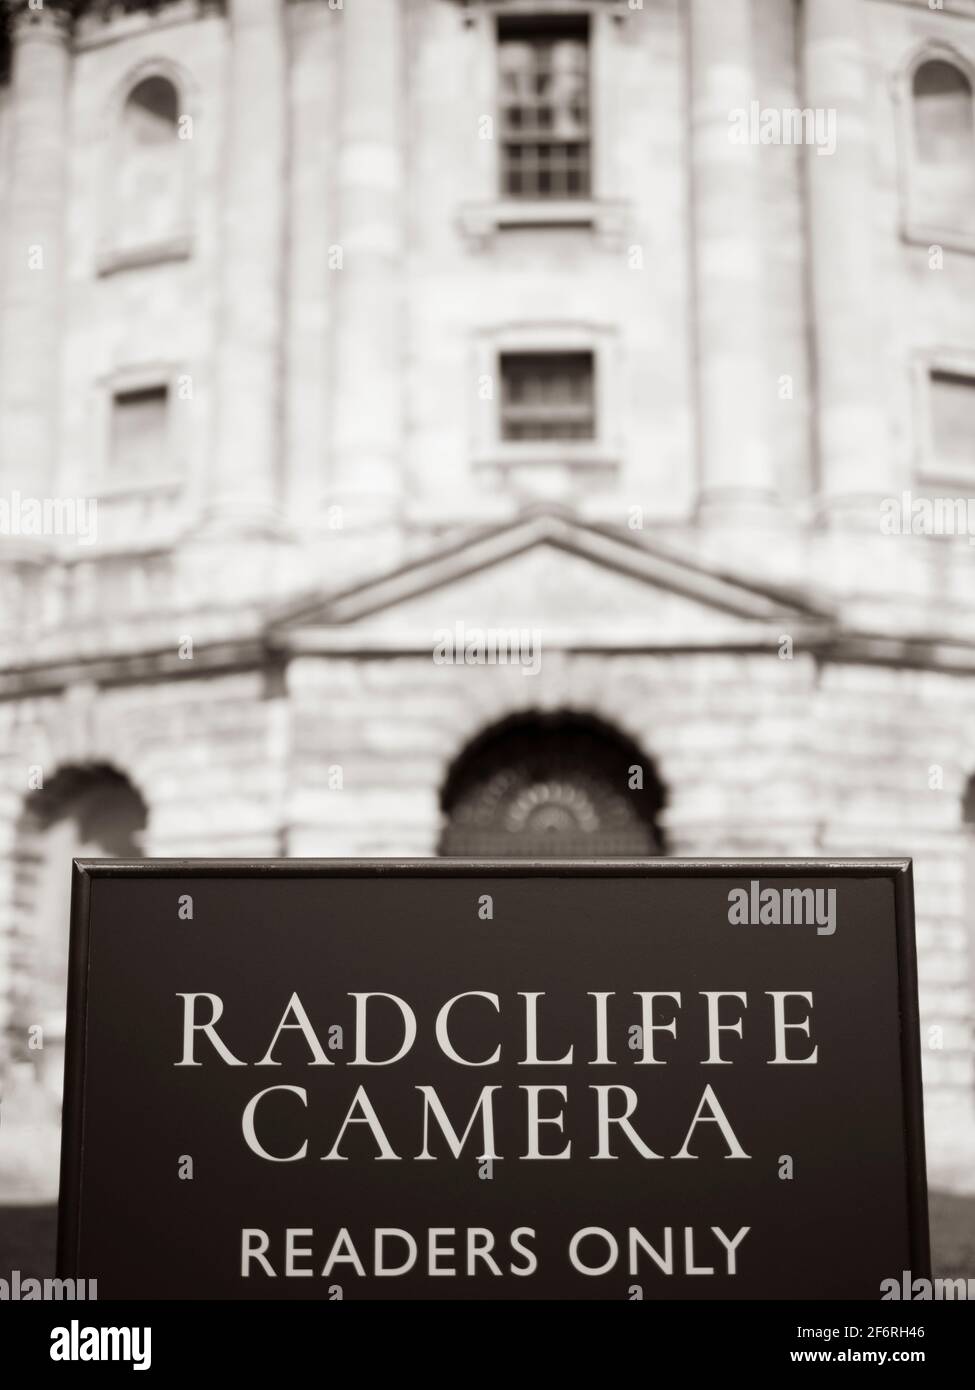 Black and White Landscape, Readers Only Sign, Radcliffe Camera, University of Oxford, Oxford, Oxfordshire, England, UK, GB. Stock Photo